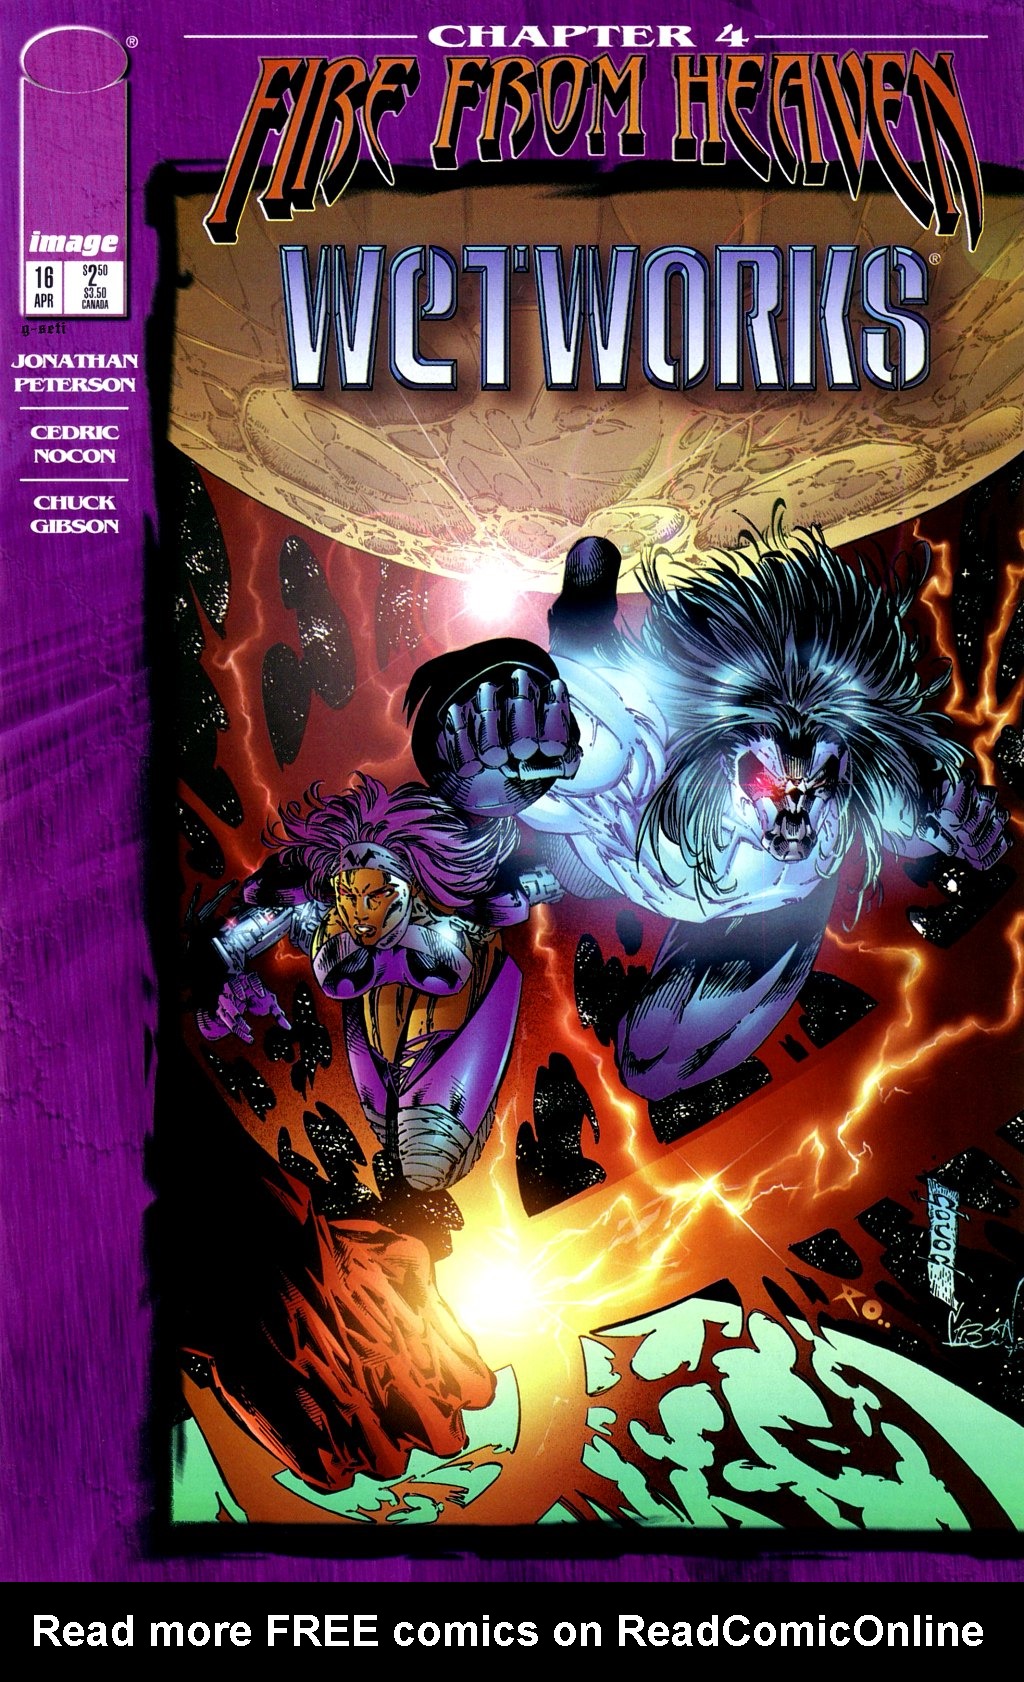 Read online Wetworks comic -  Issue #16 - 1